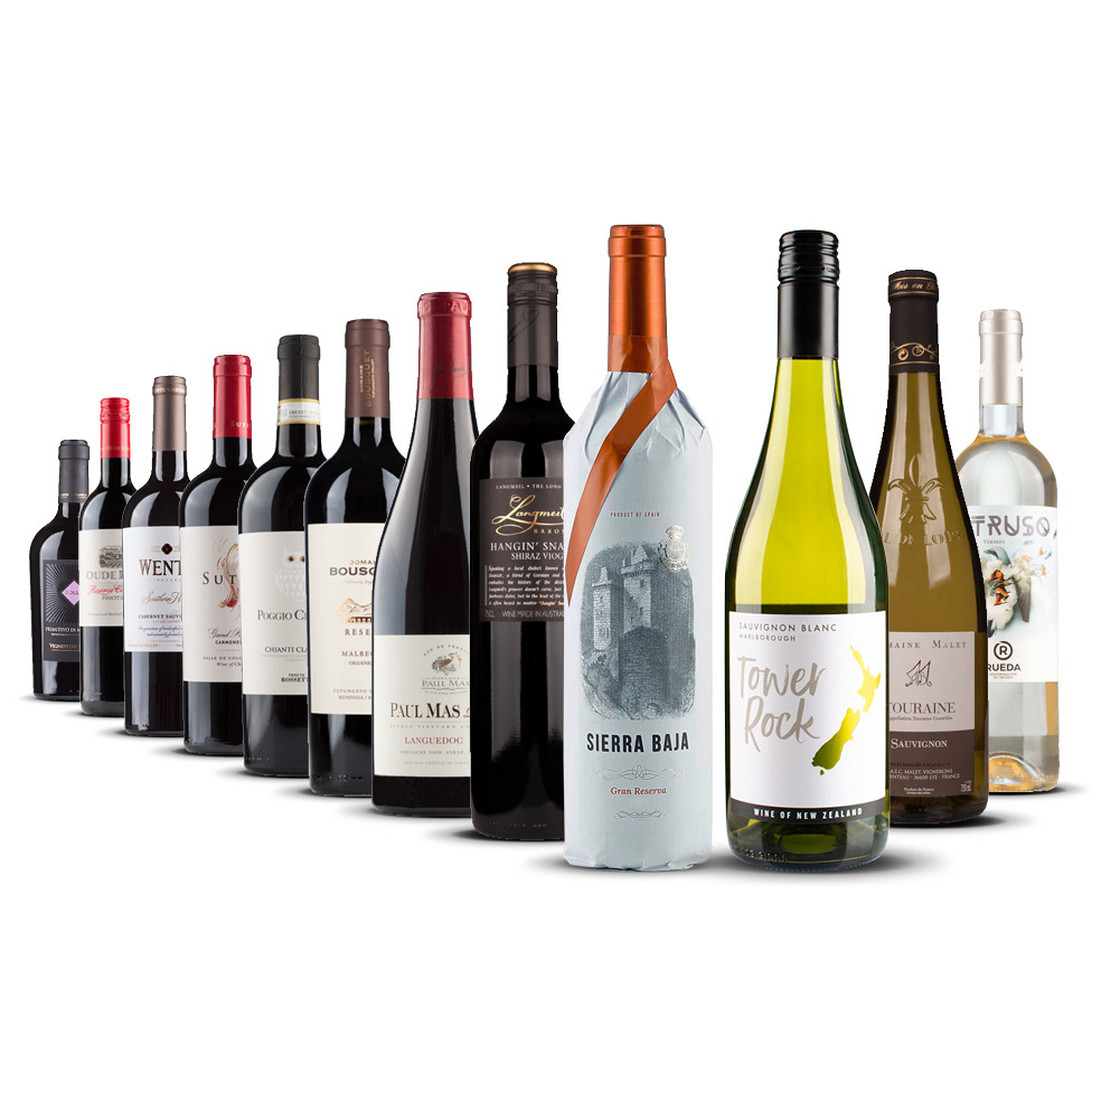 Find+Buy: Find+Buy The of wein.plus wein.plus members our wines |